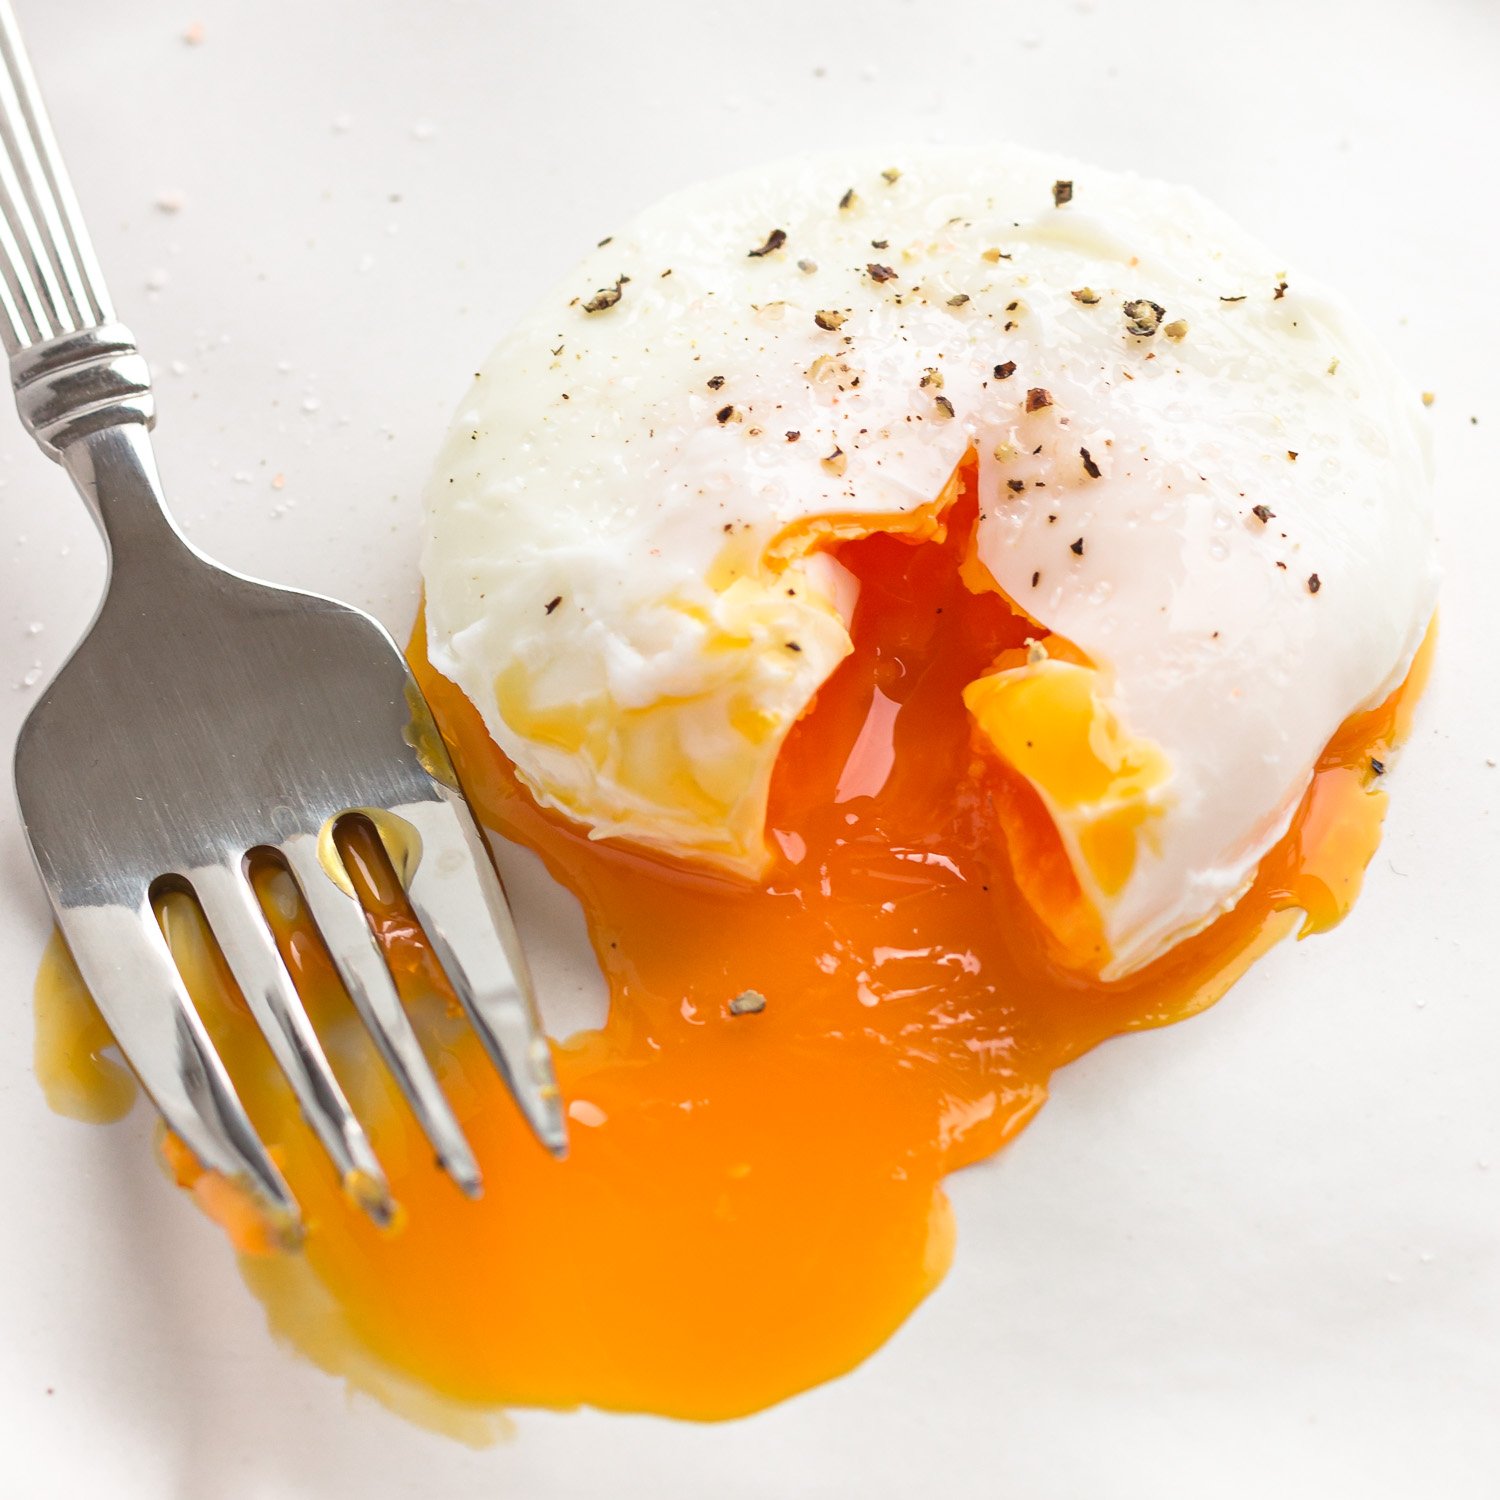 A seasoned poached egg next to a fork with the golden, oozy yolk running out.